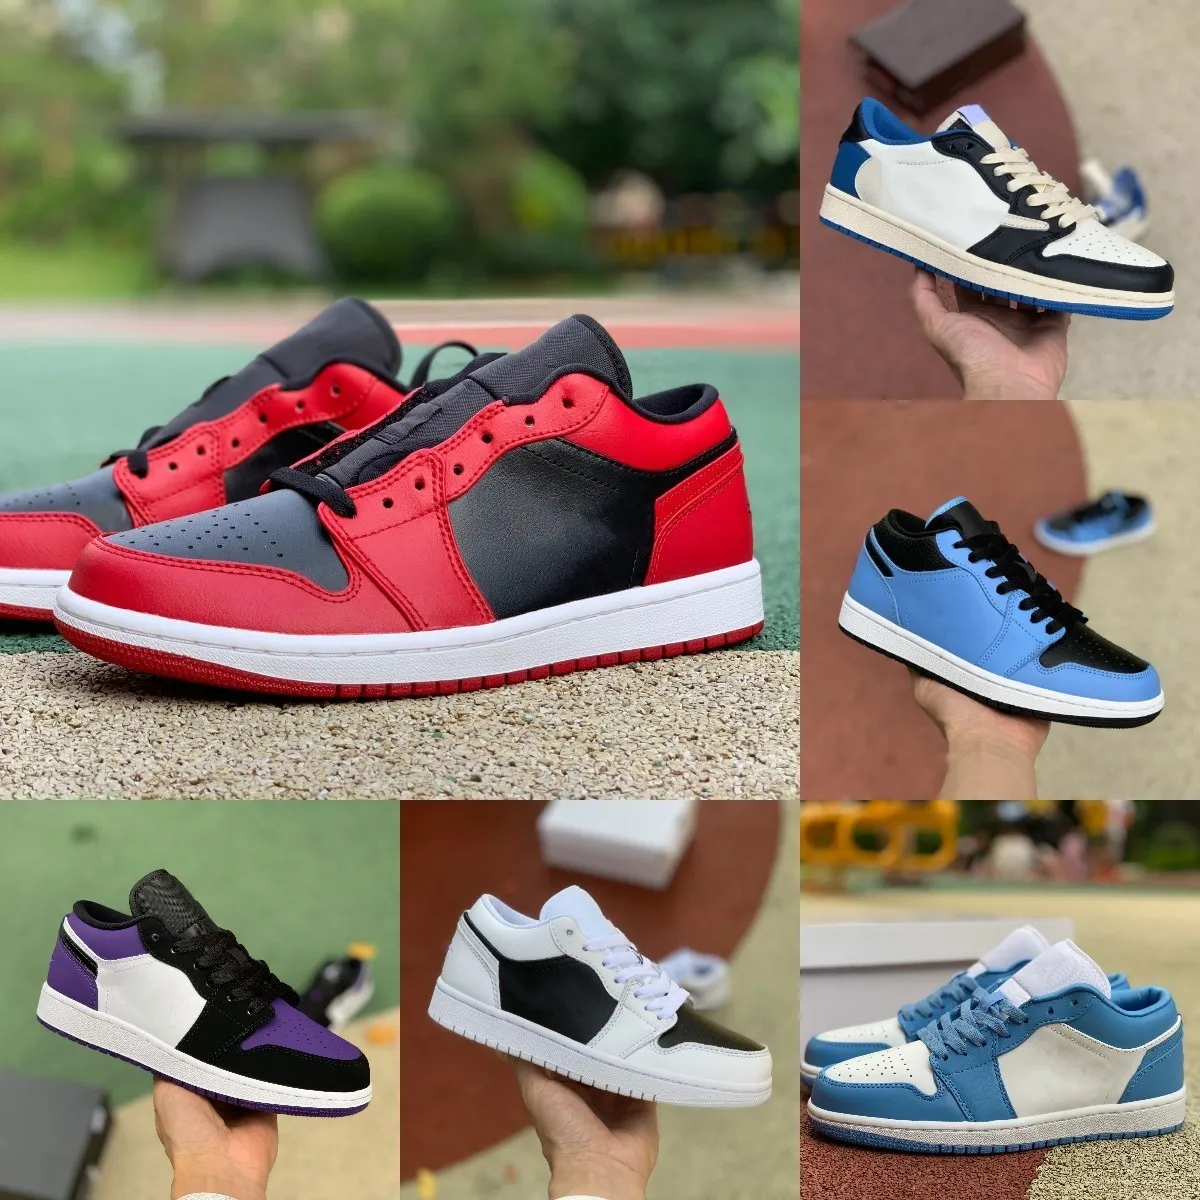 Jumpman X förbjöd 1 1S Low Basketball Sports Shoes Fragment Starfish White Brown Gold Unc Gold Black Toe Panda Mystic Green Noble Red Trainer Designers Sneakers Brand